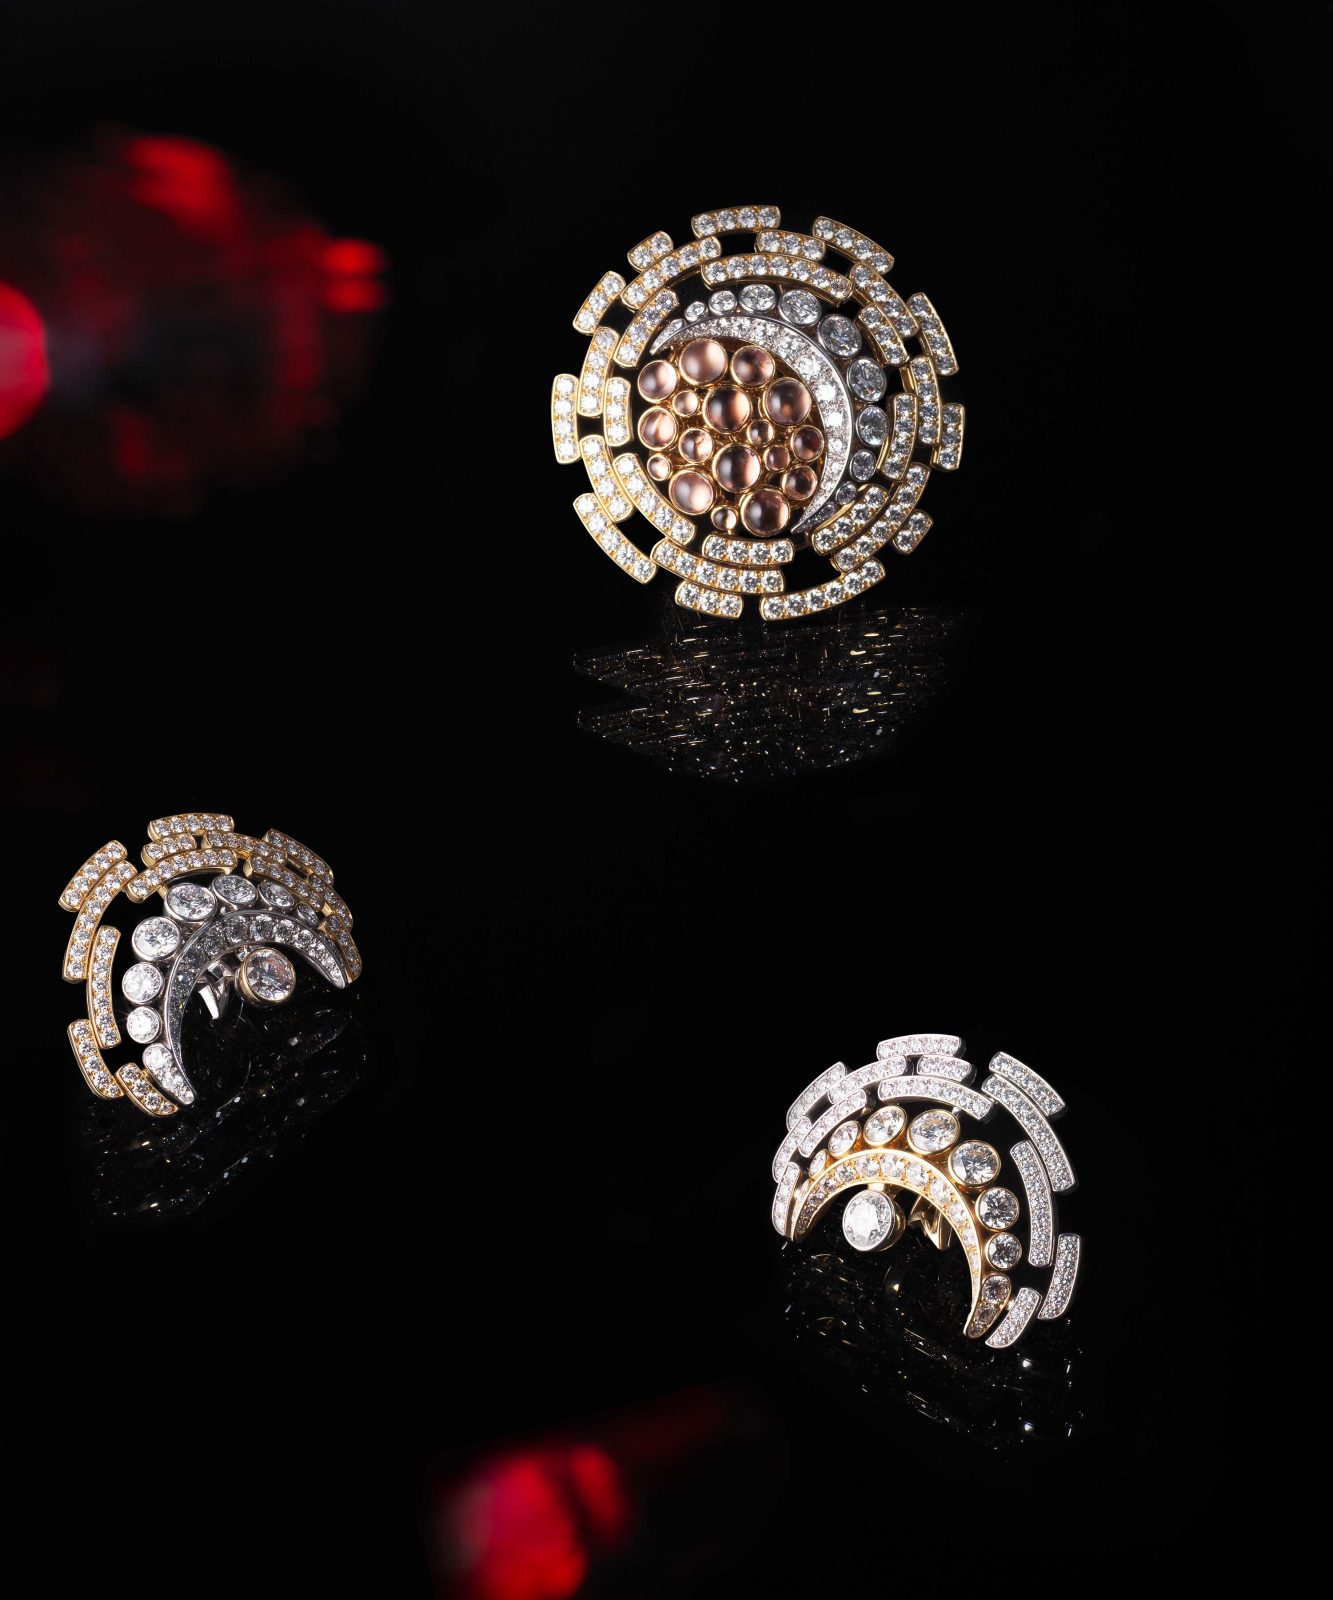 Galaxy Galore: Haute Living's Exclusive Editorial Featuring Chanel's 1932 High Jewelry Collection